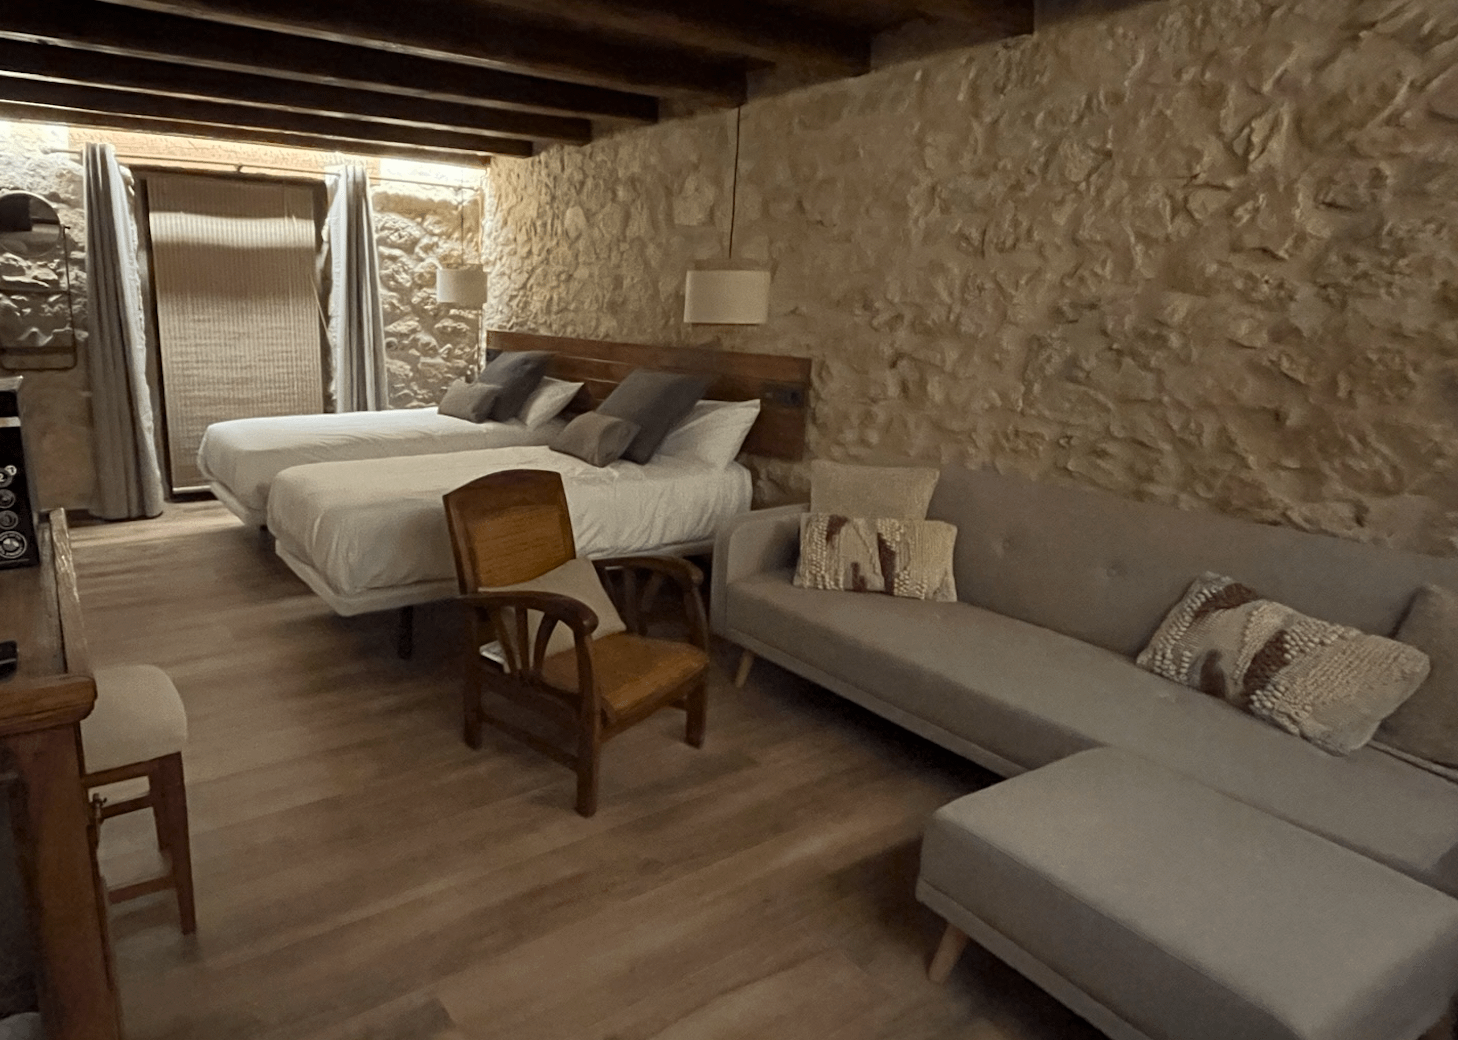 The stone walls make the room original and cozy